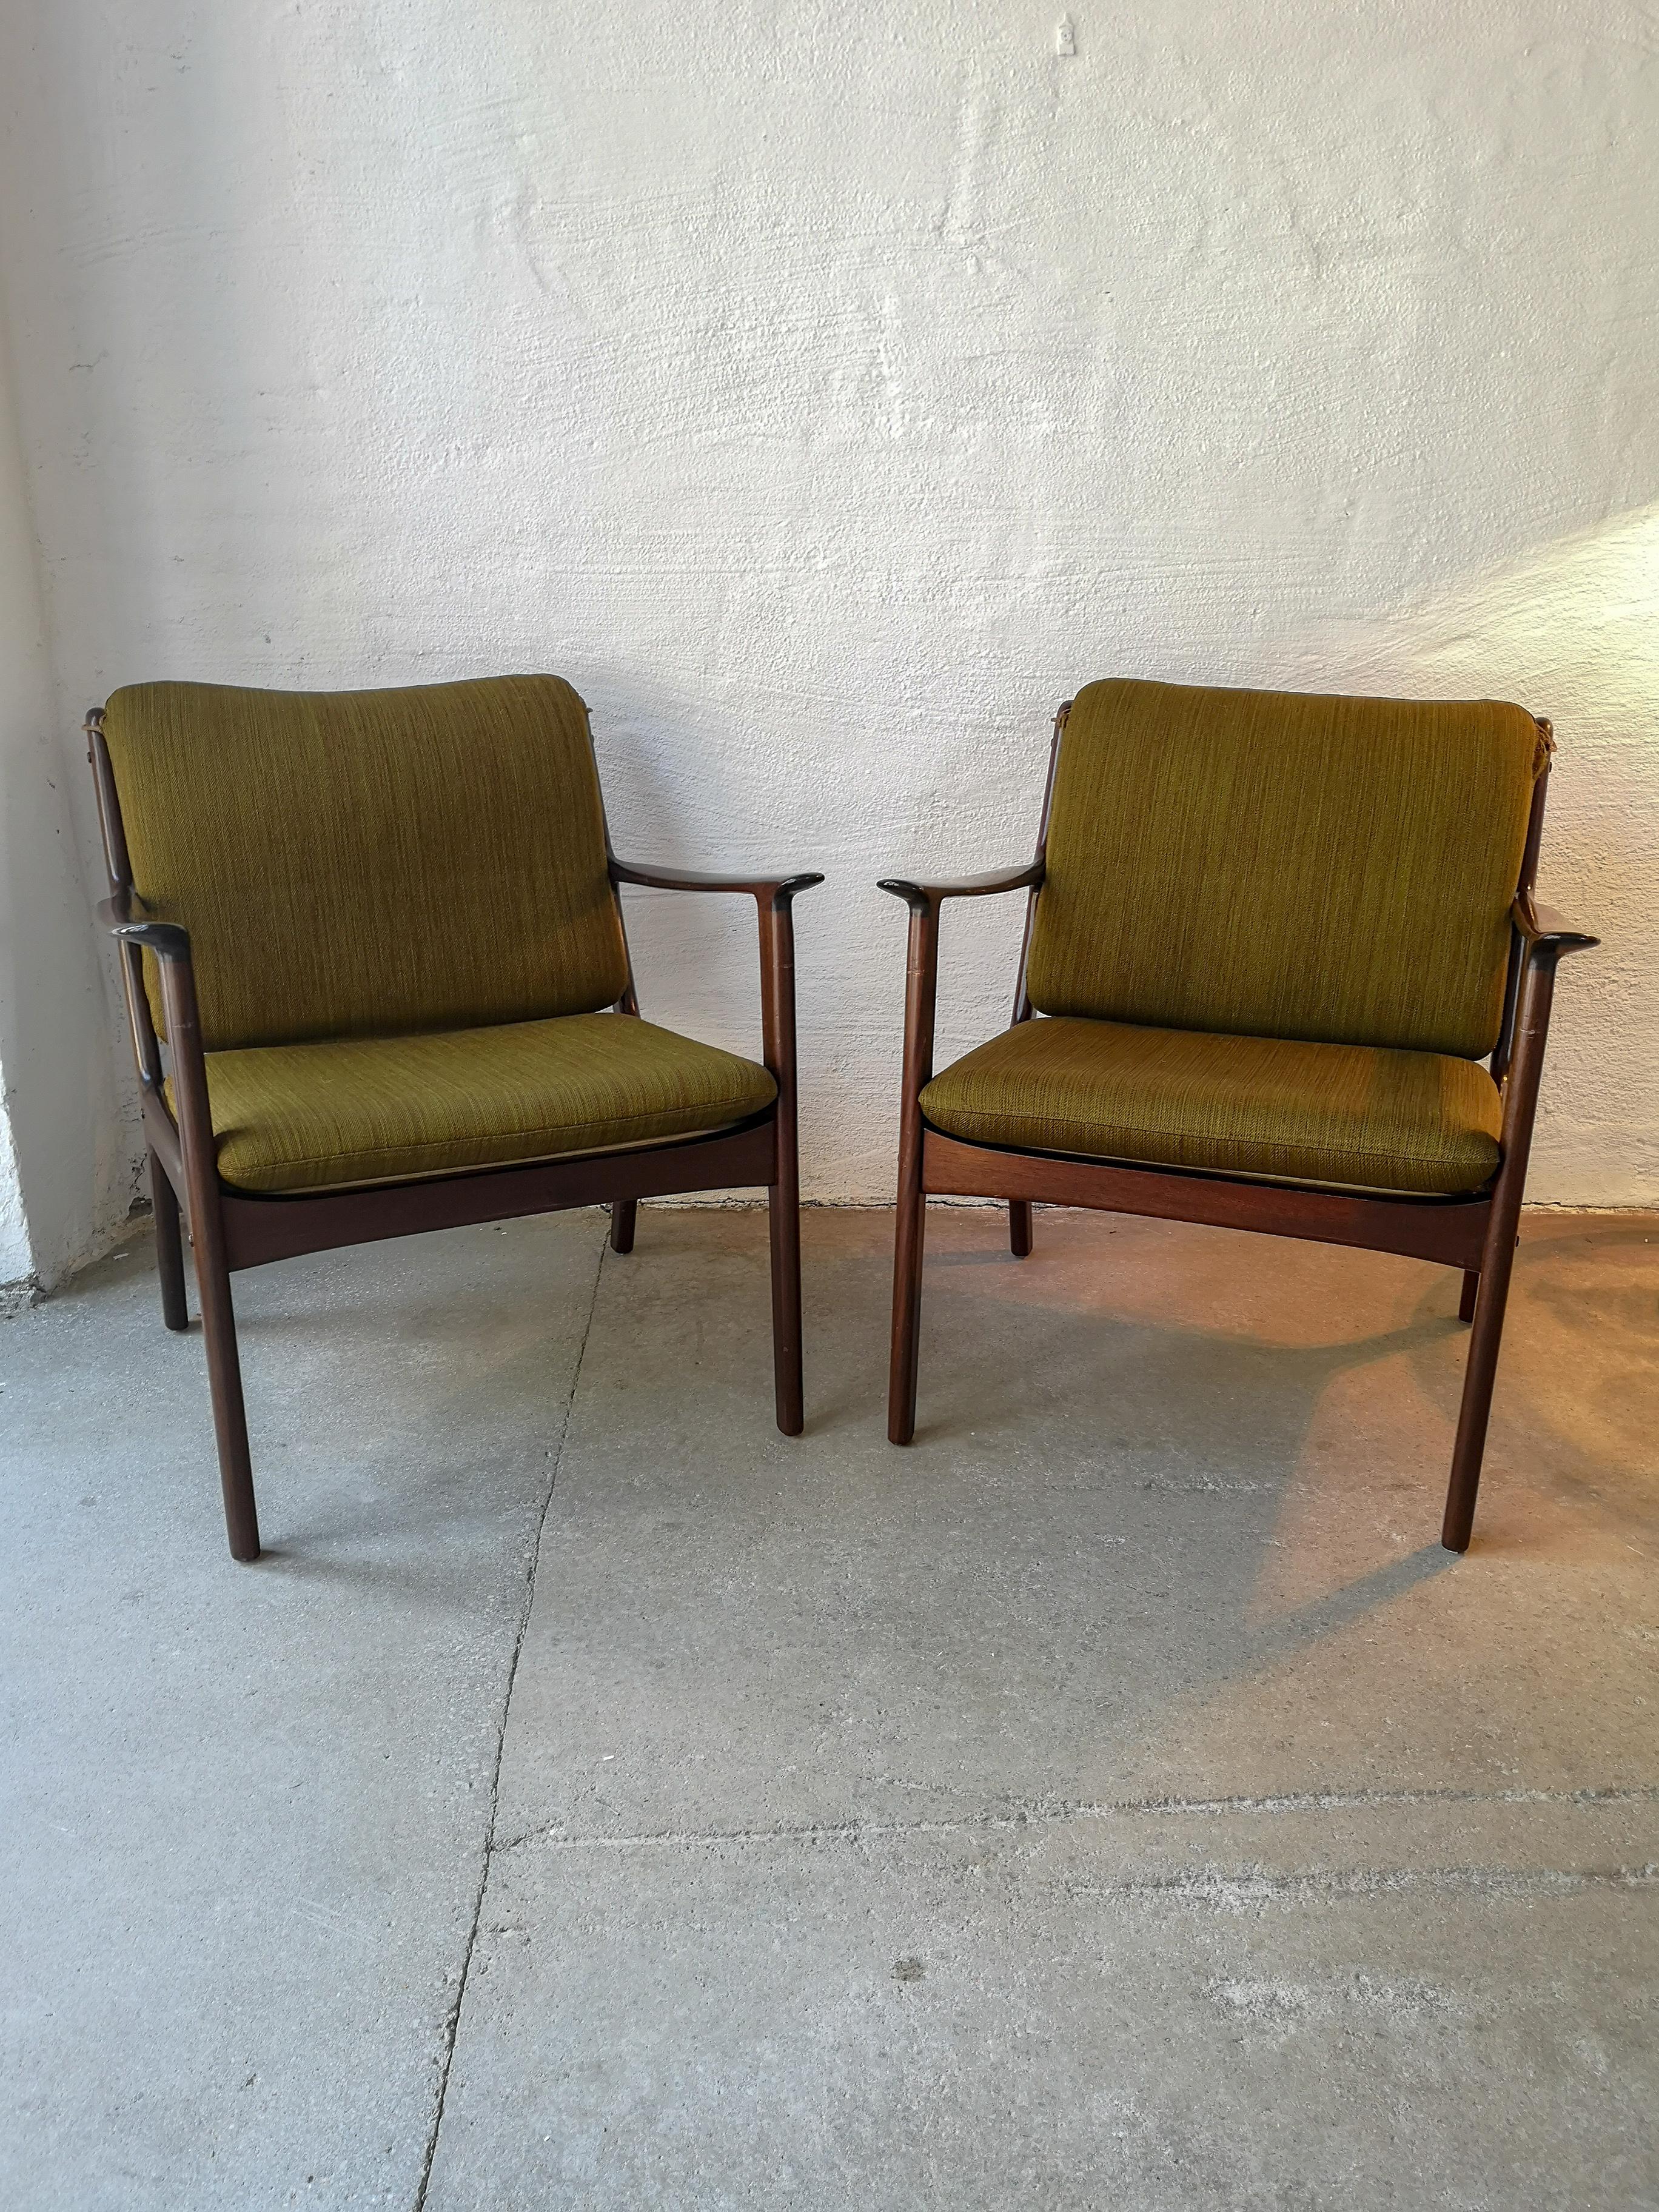 Ole Wanscher lounge chair made of massive mahogany.

Model PJ 112, made by Poul Jeppeson. 

If wanted the fabric can be changed from the original one. 

Condition , overall good condition, marks on the front of the legs and fabric open right